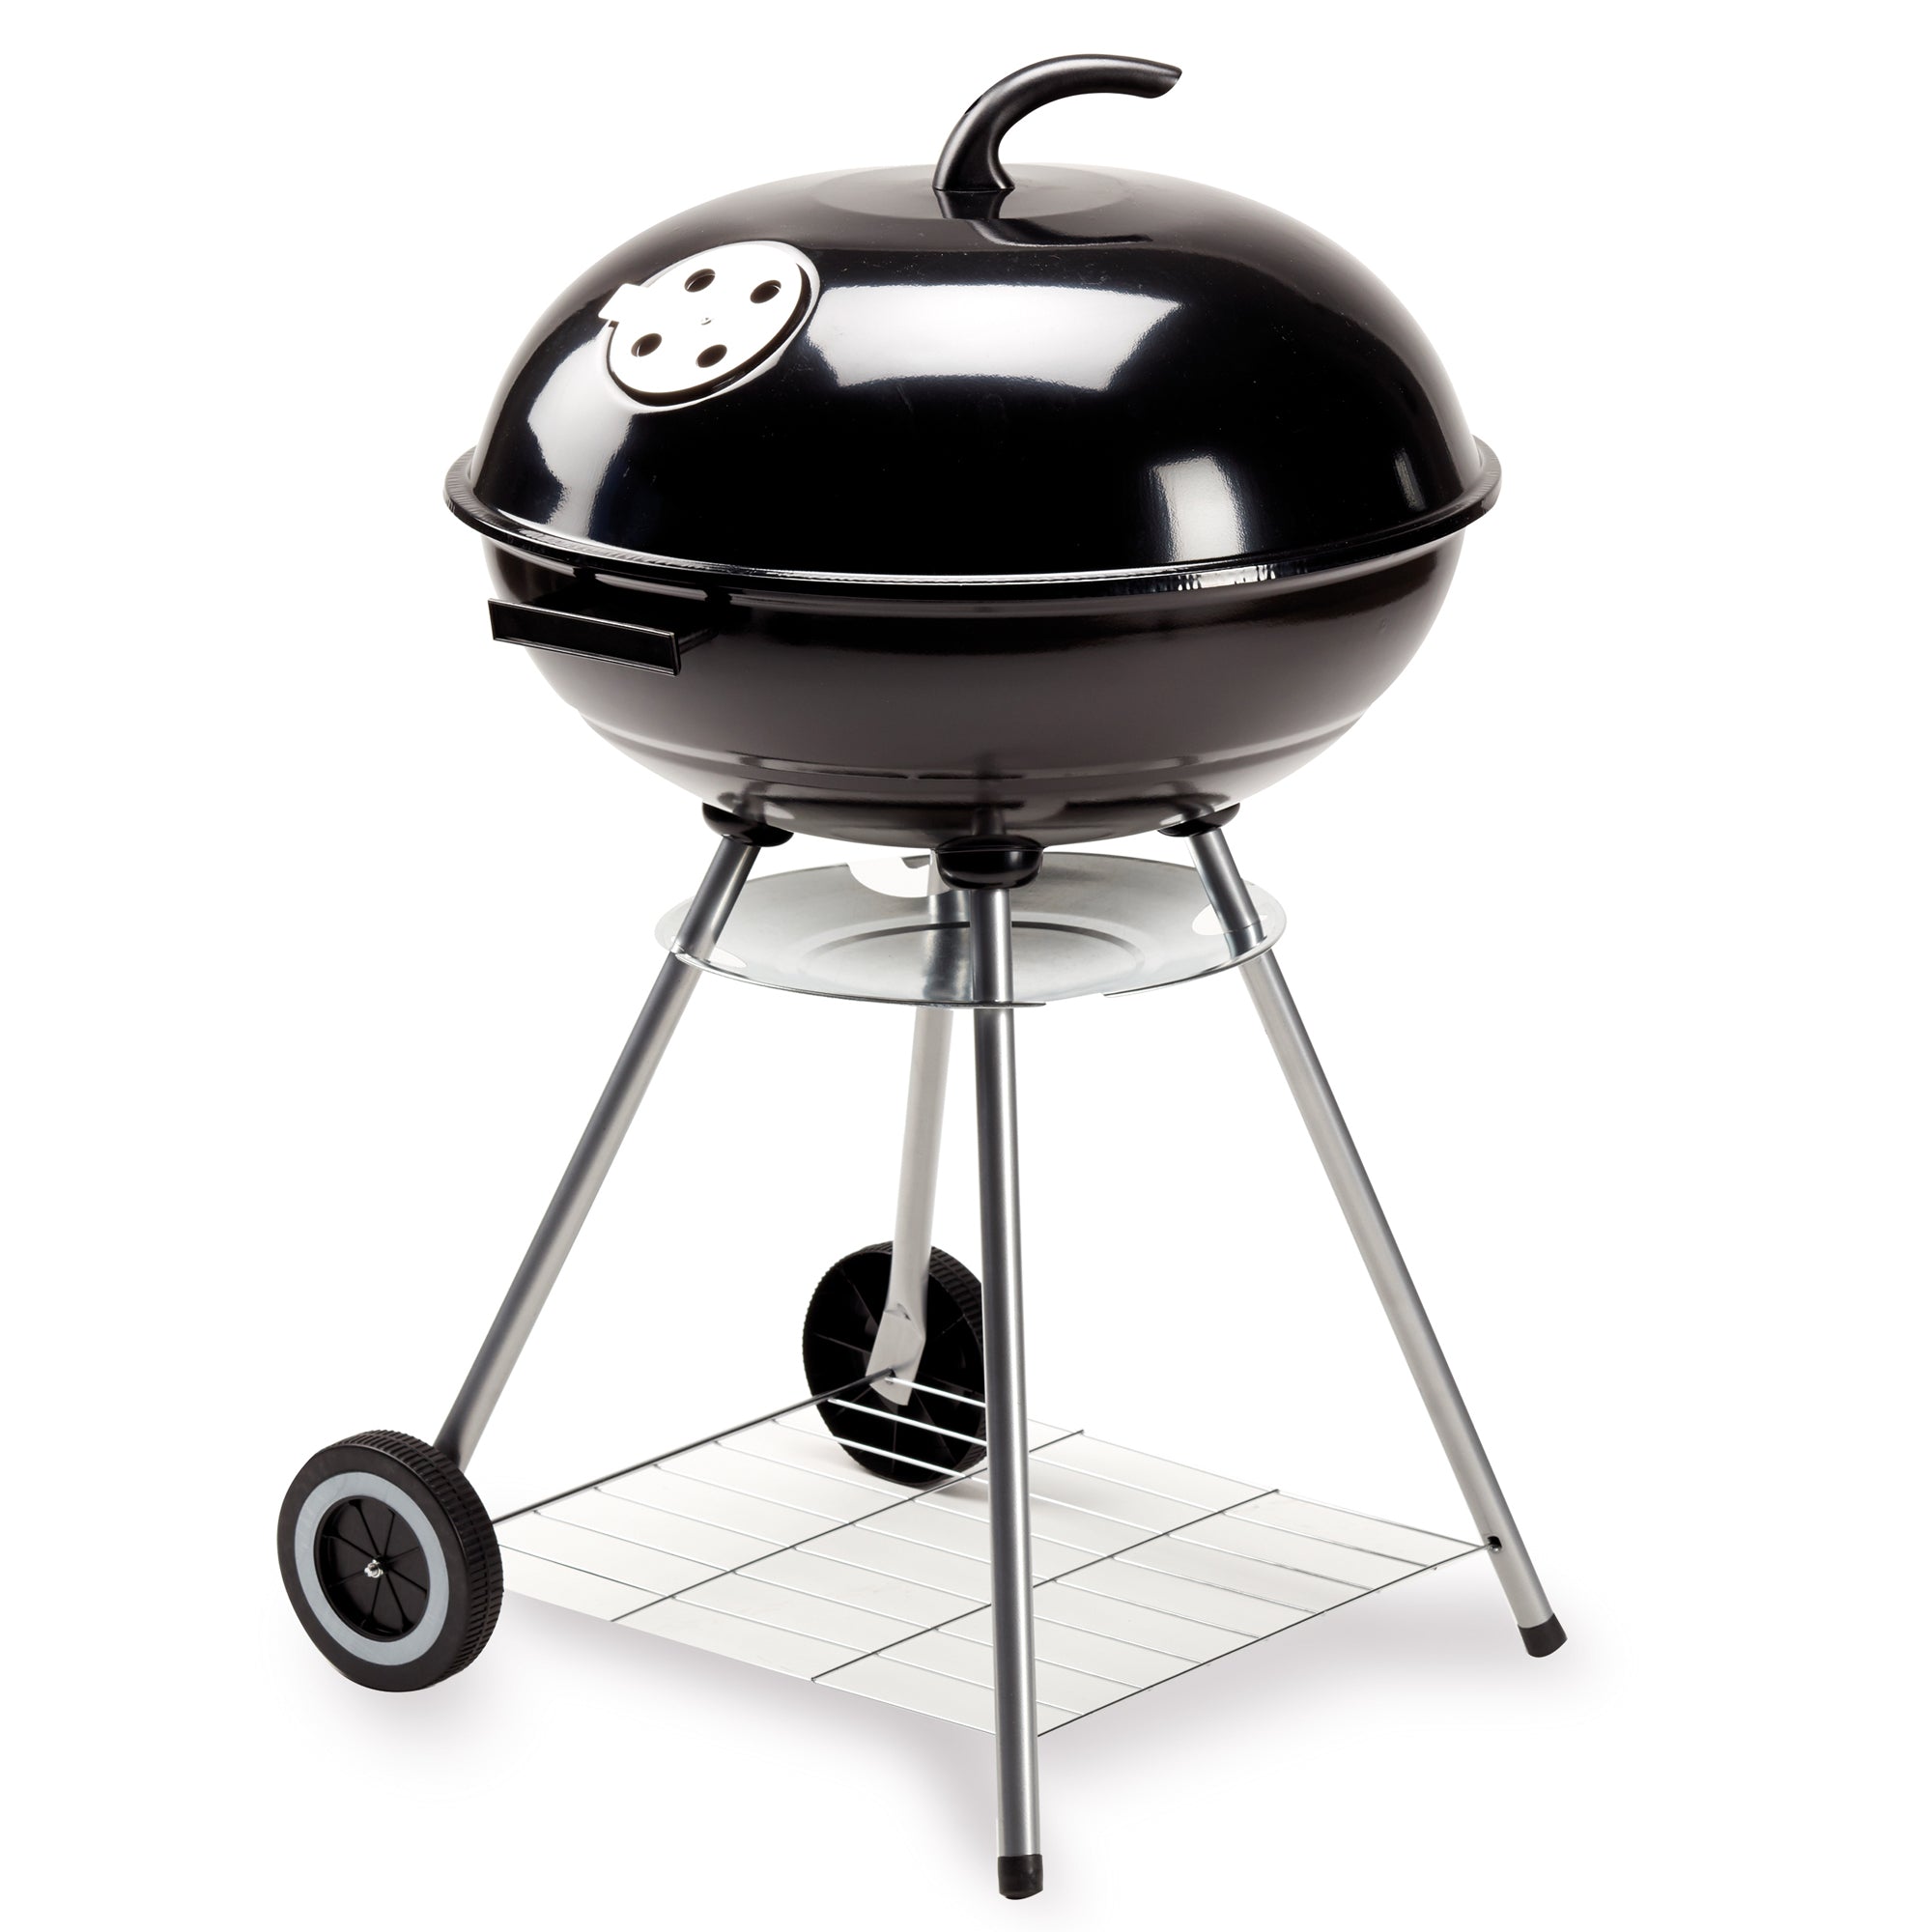 garden-friend-barbecue-free-time-d56cm